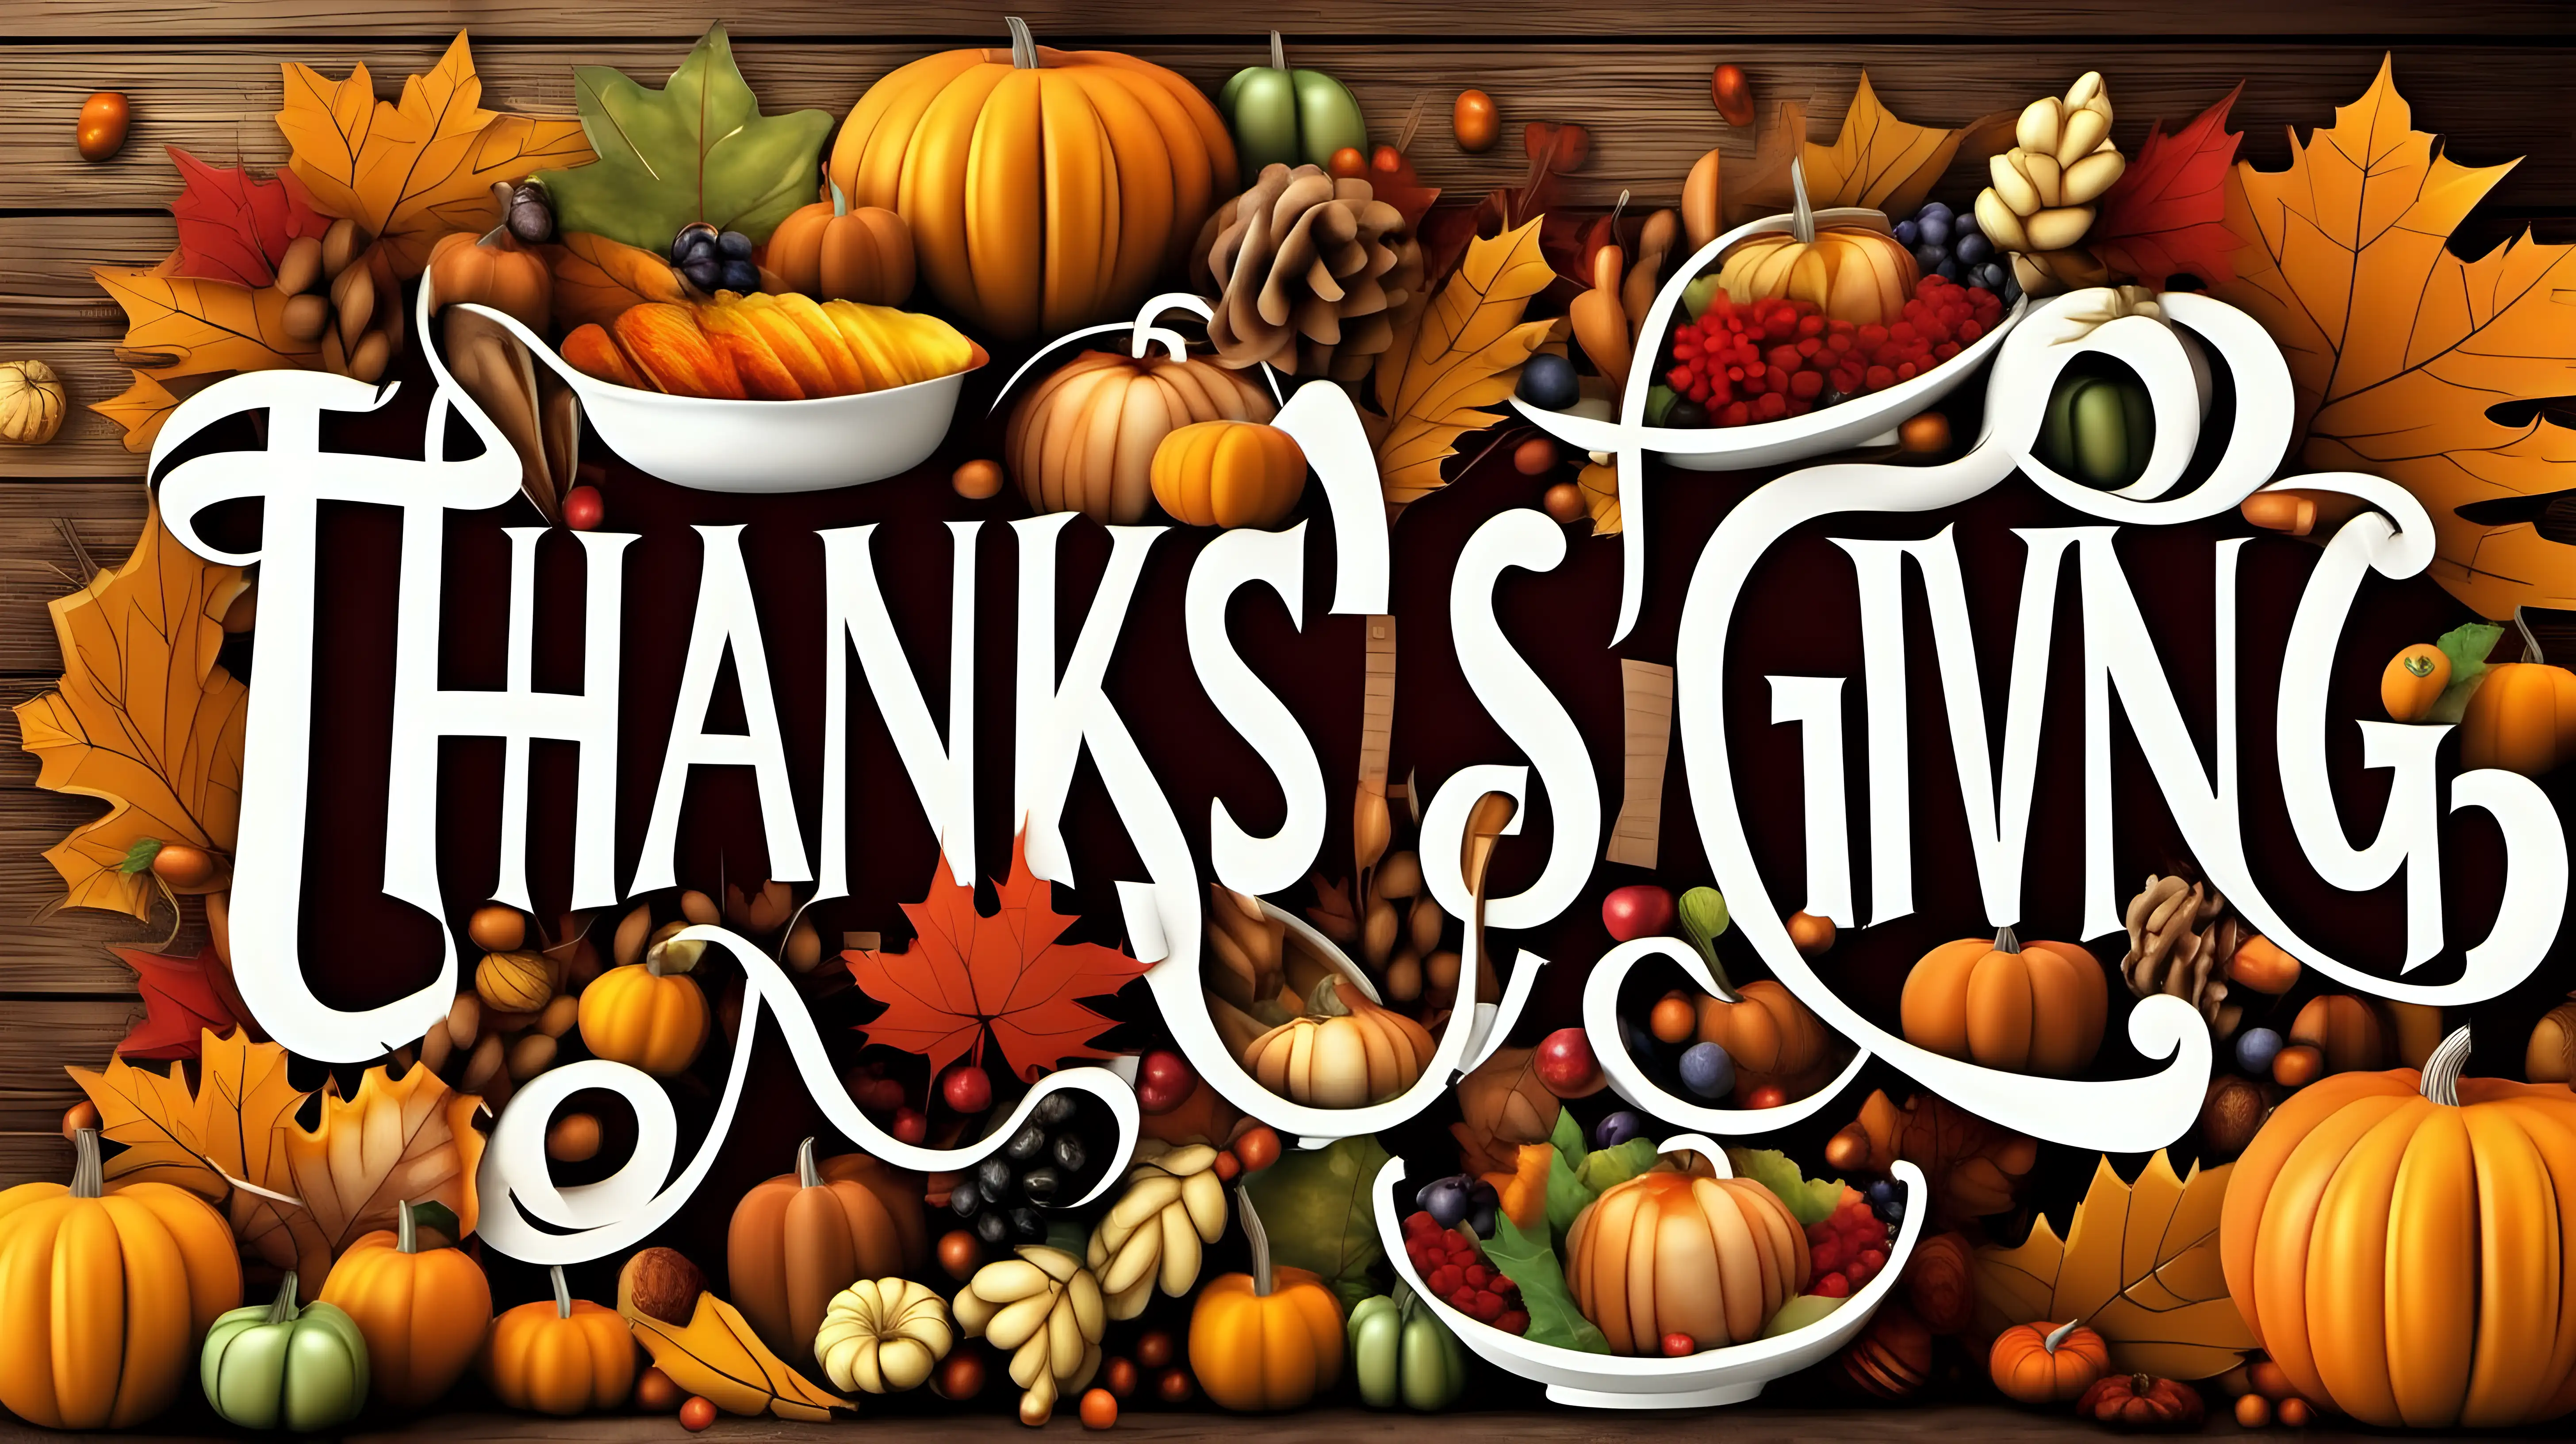 write happy thanks giving in the middle with beautiful style in large fonts and make few dishes around it